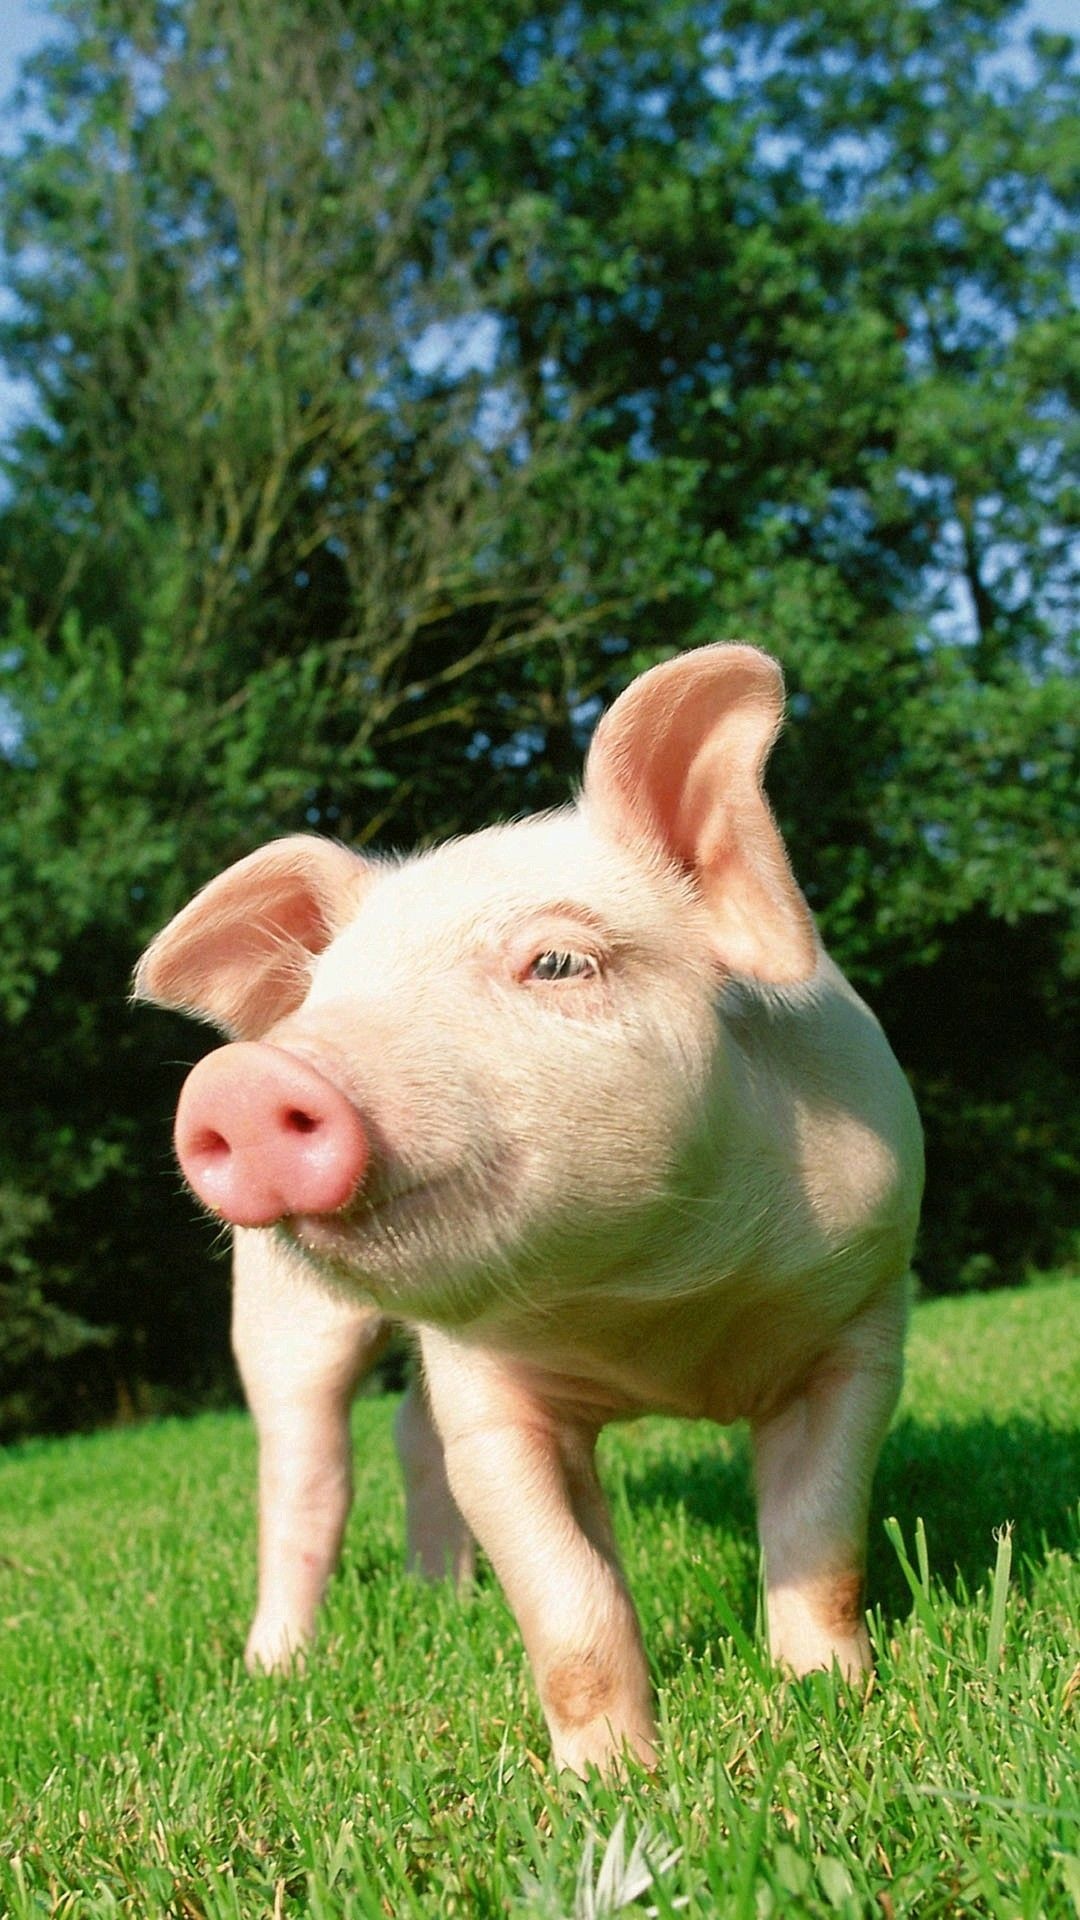 Cute pig wallpaper, Baby pigs delight, Charming snouts, Playful oinks, 1080x1920 Full HD Handy